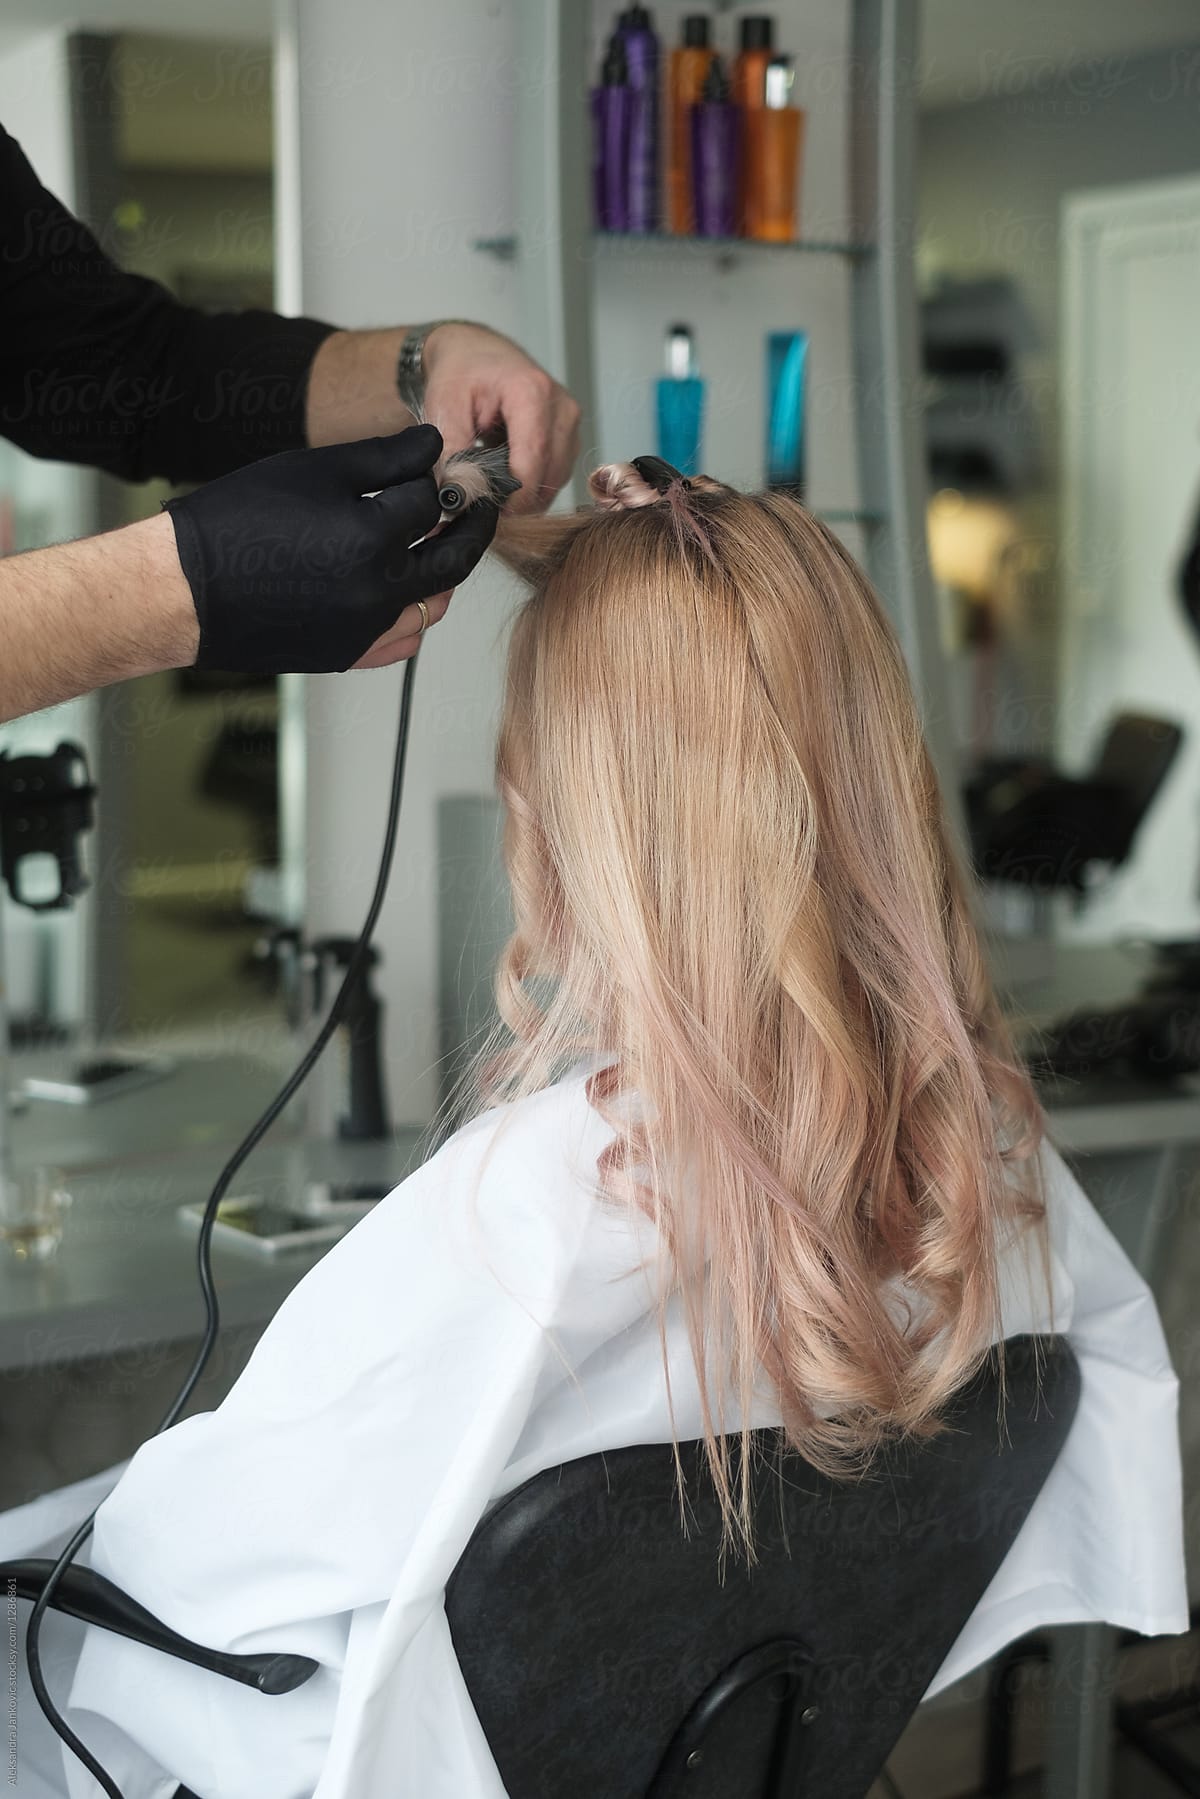 Hairdresser Working On A Customer With Curling Iron